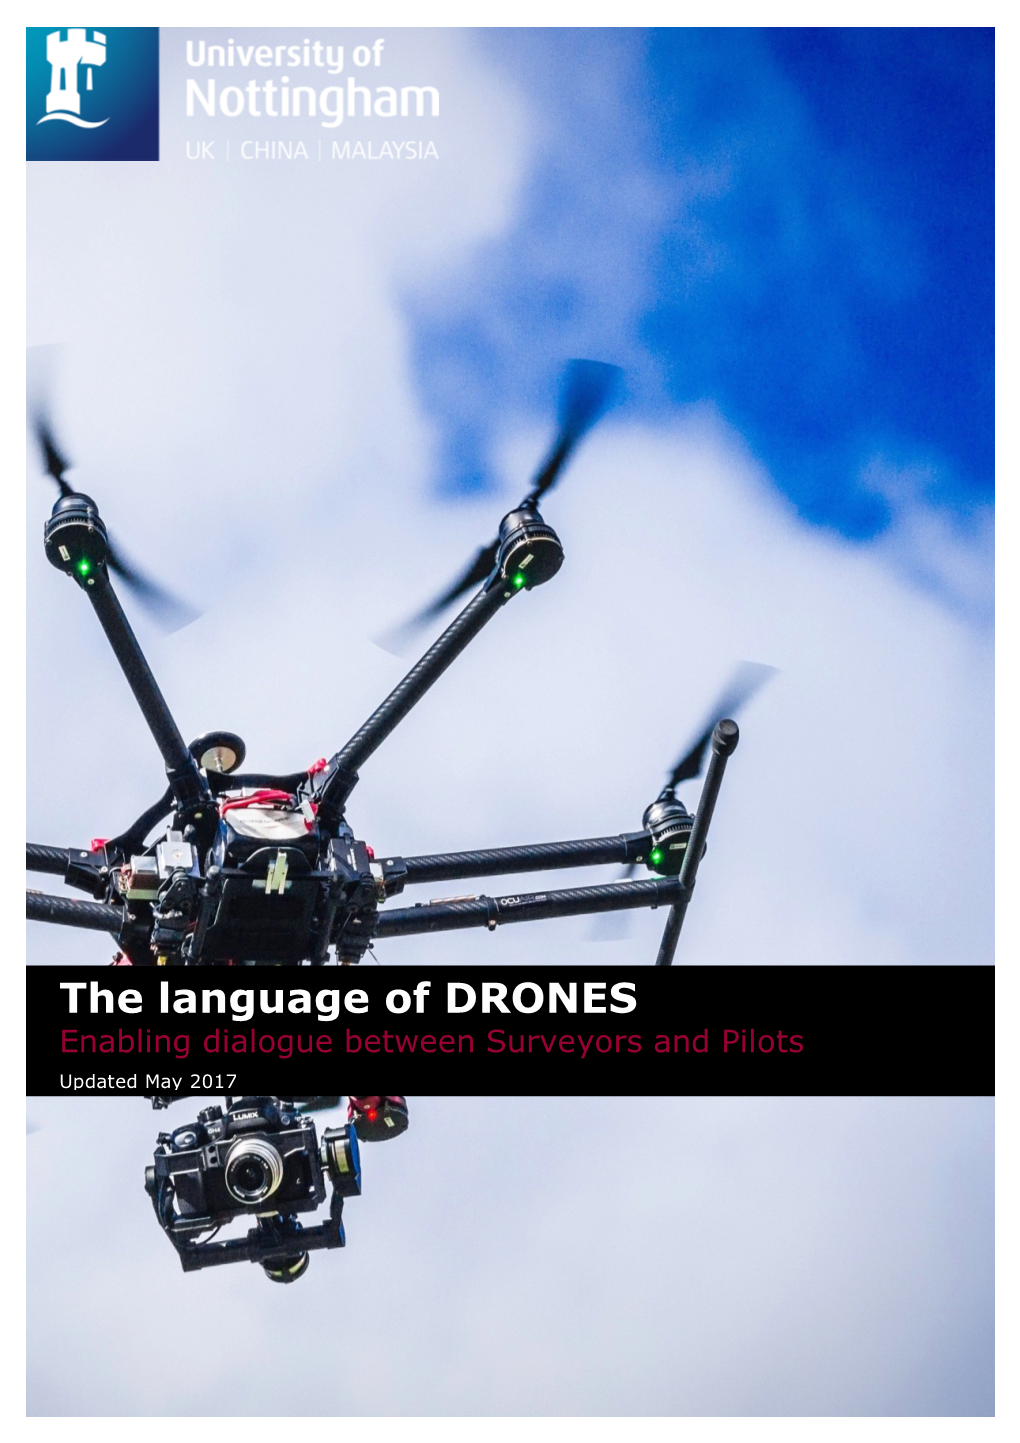 The Language of Drones May 17